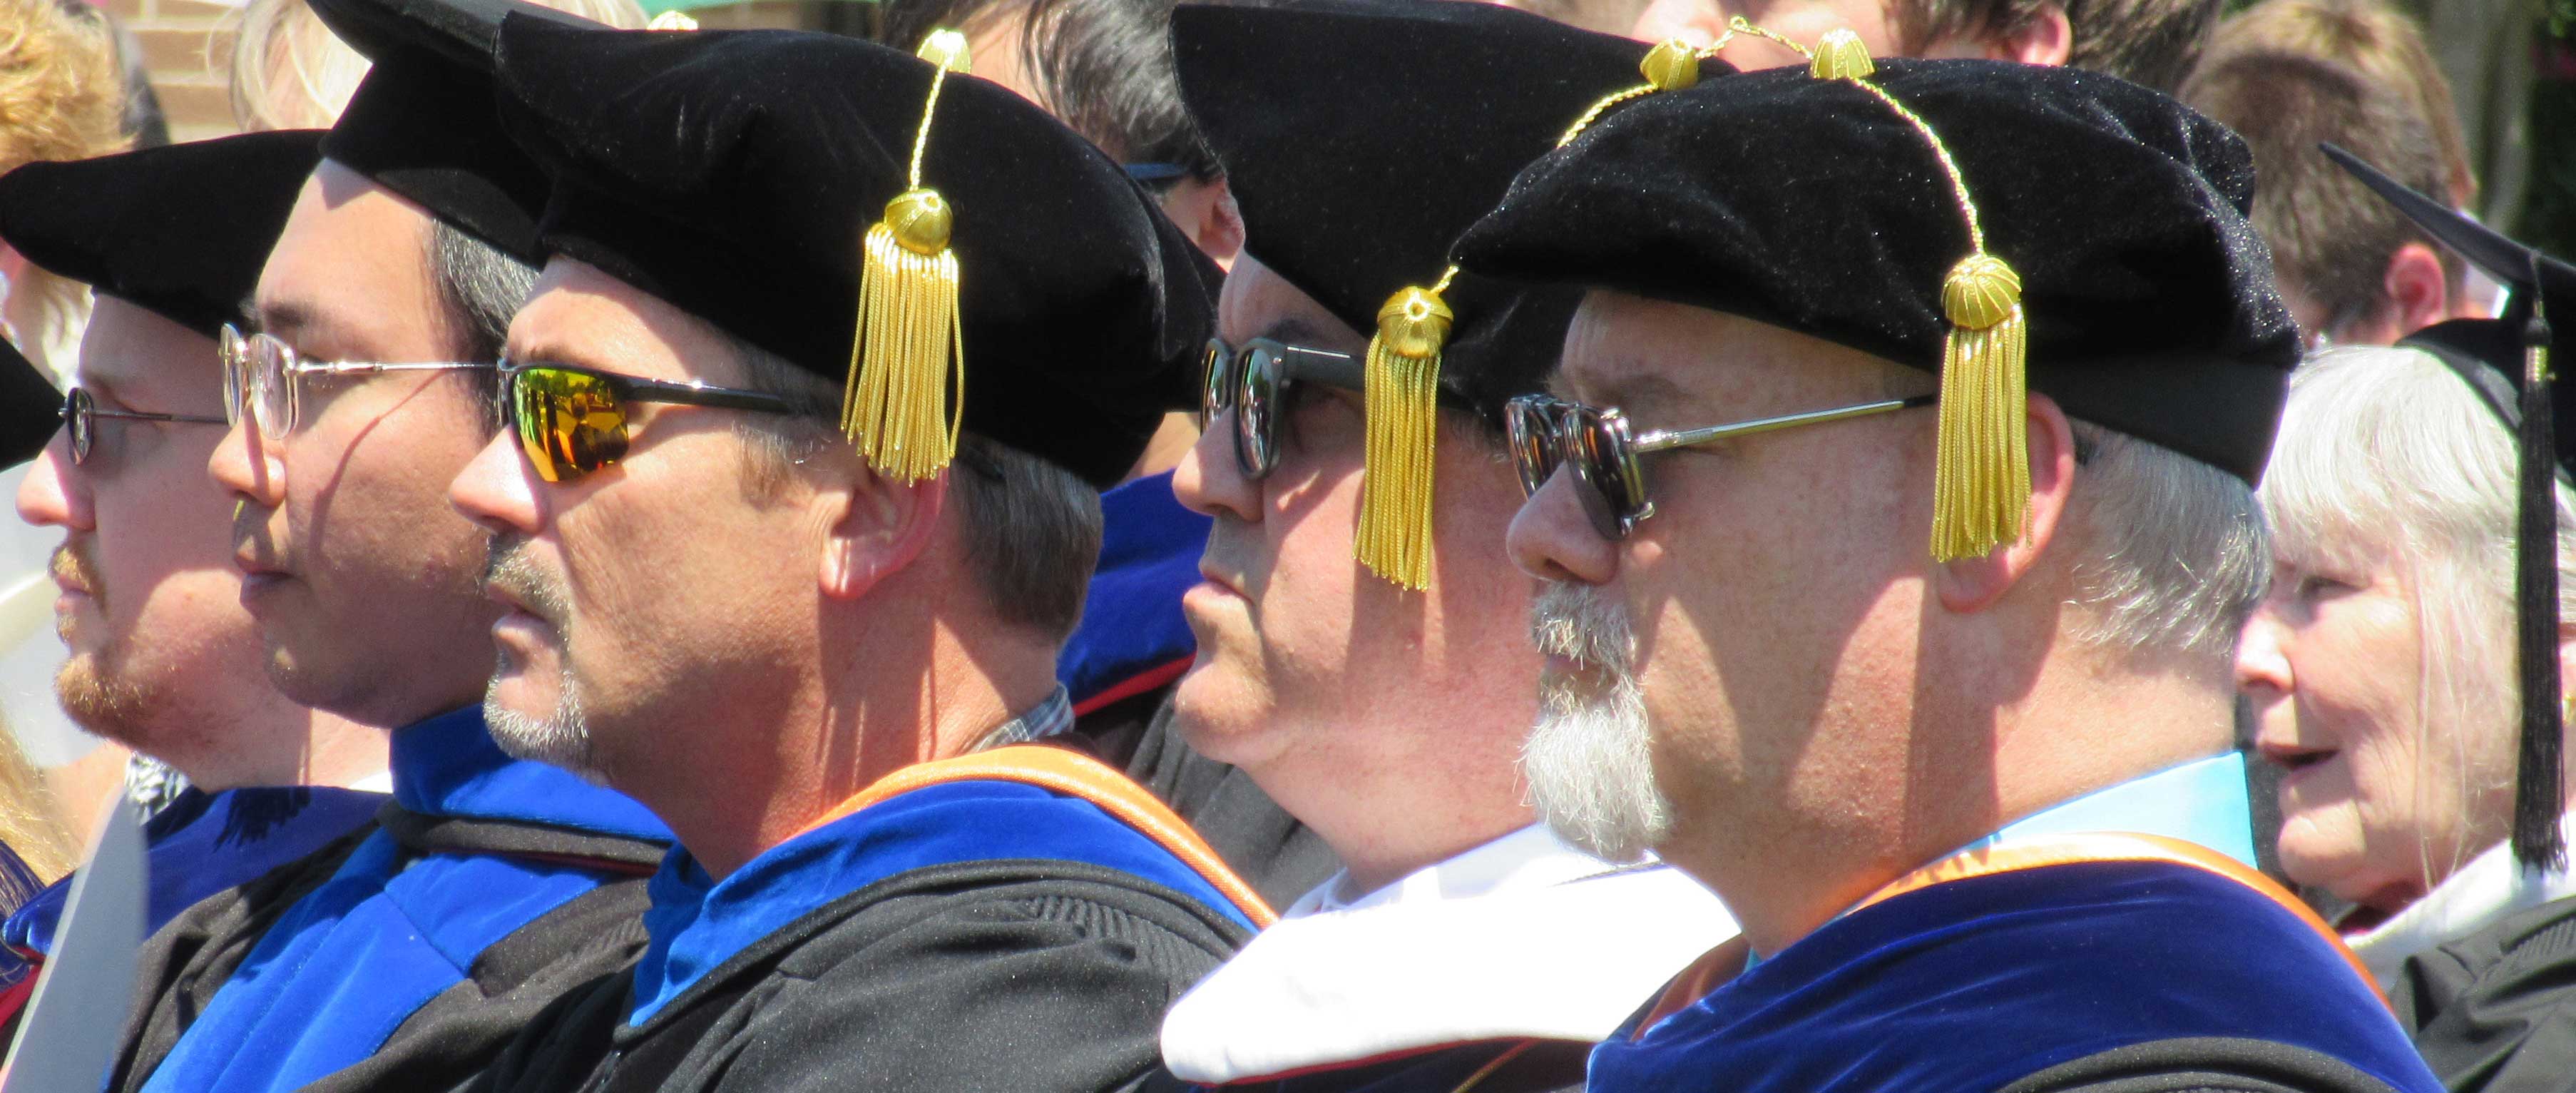 Faculty members in full regalia during commencement exercises.